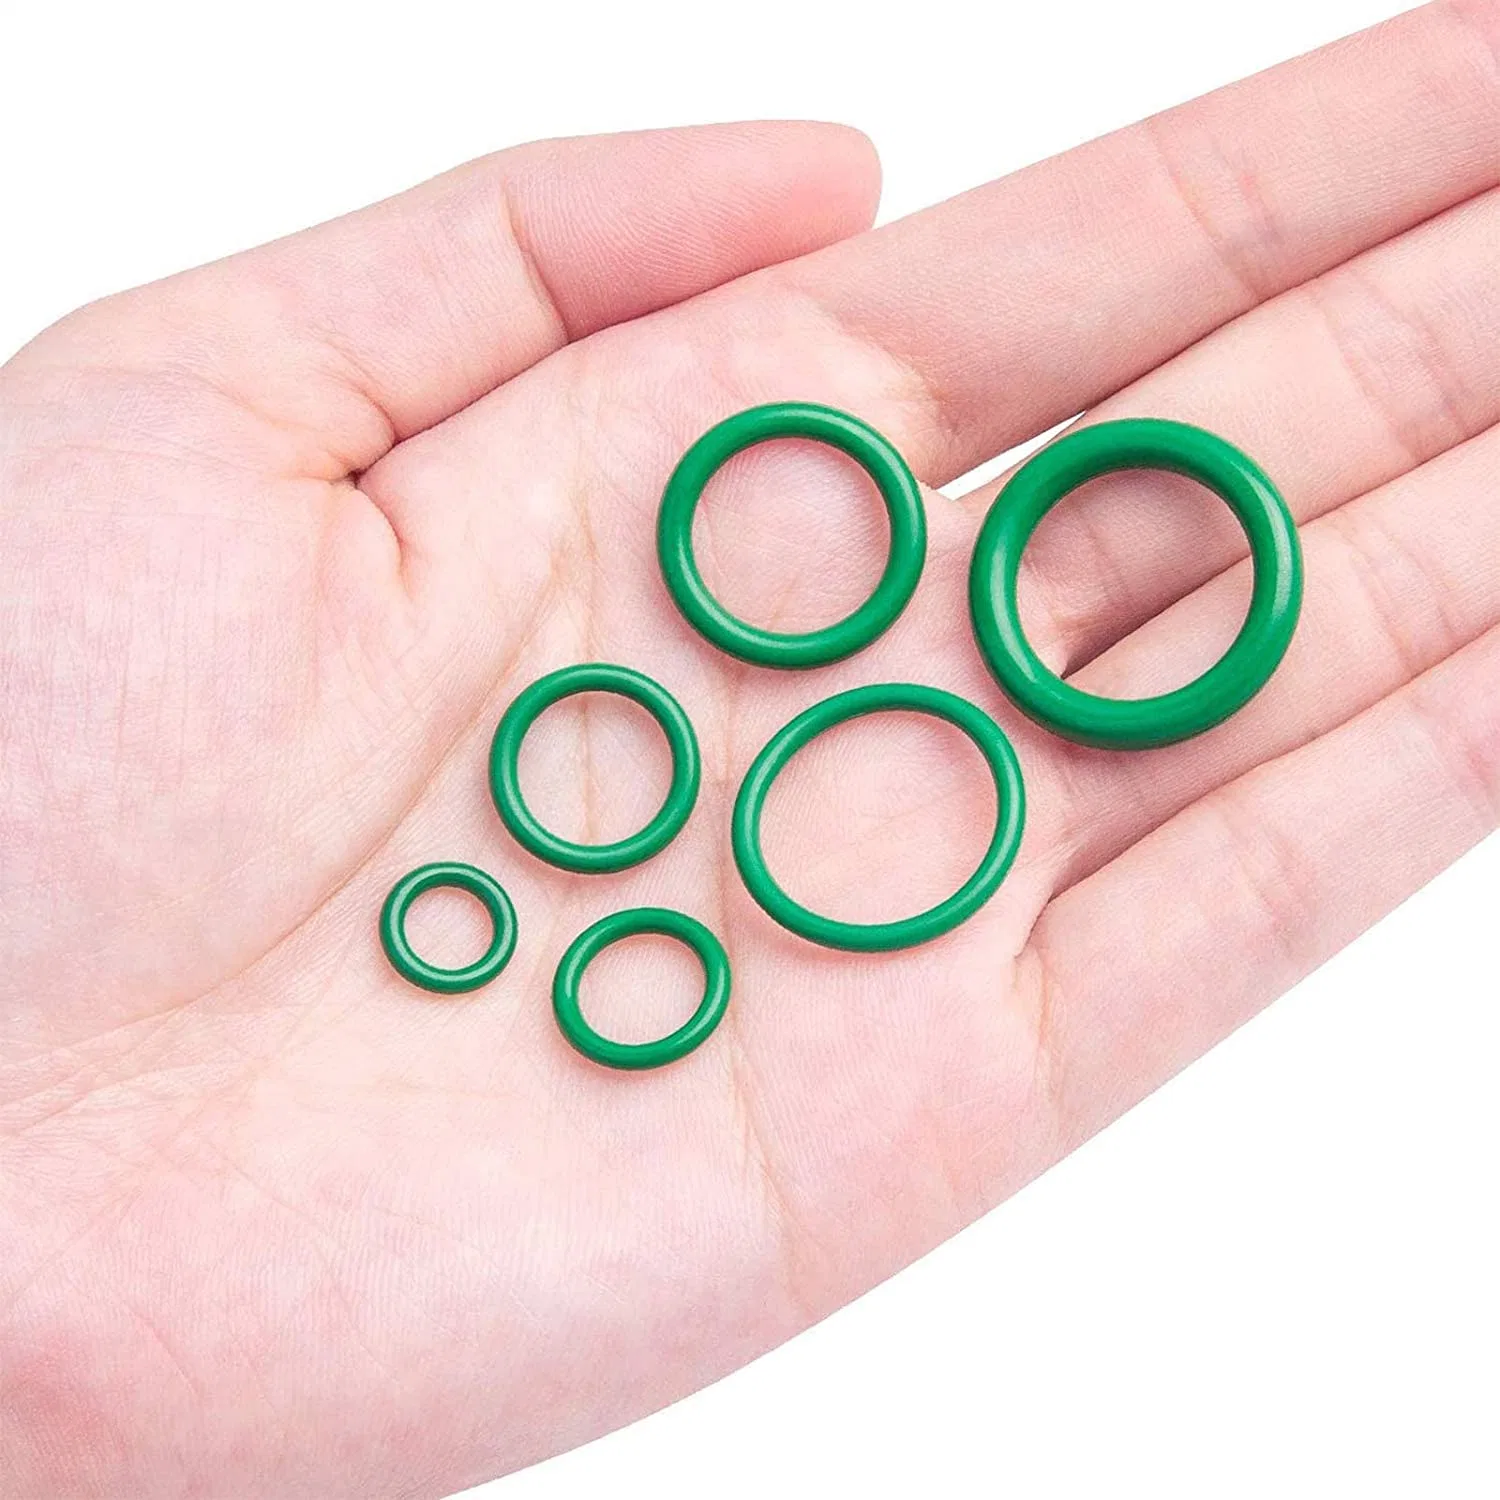 Wearable Rubber Cushion Auto Standard Export Packing Rubber FKM/ NBR Silicon Seal Rings O Ring